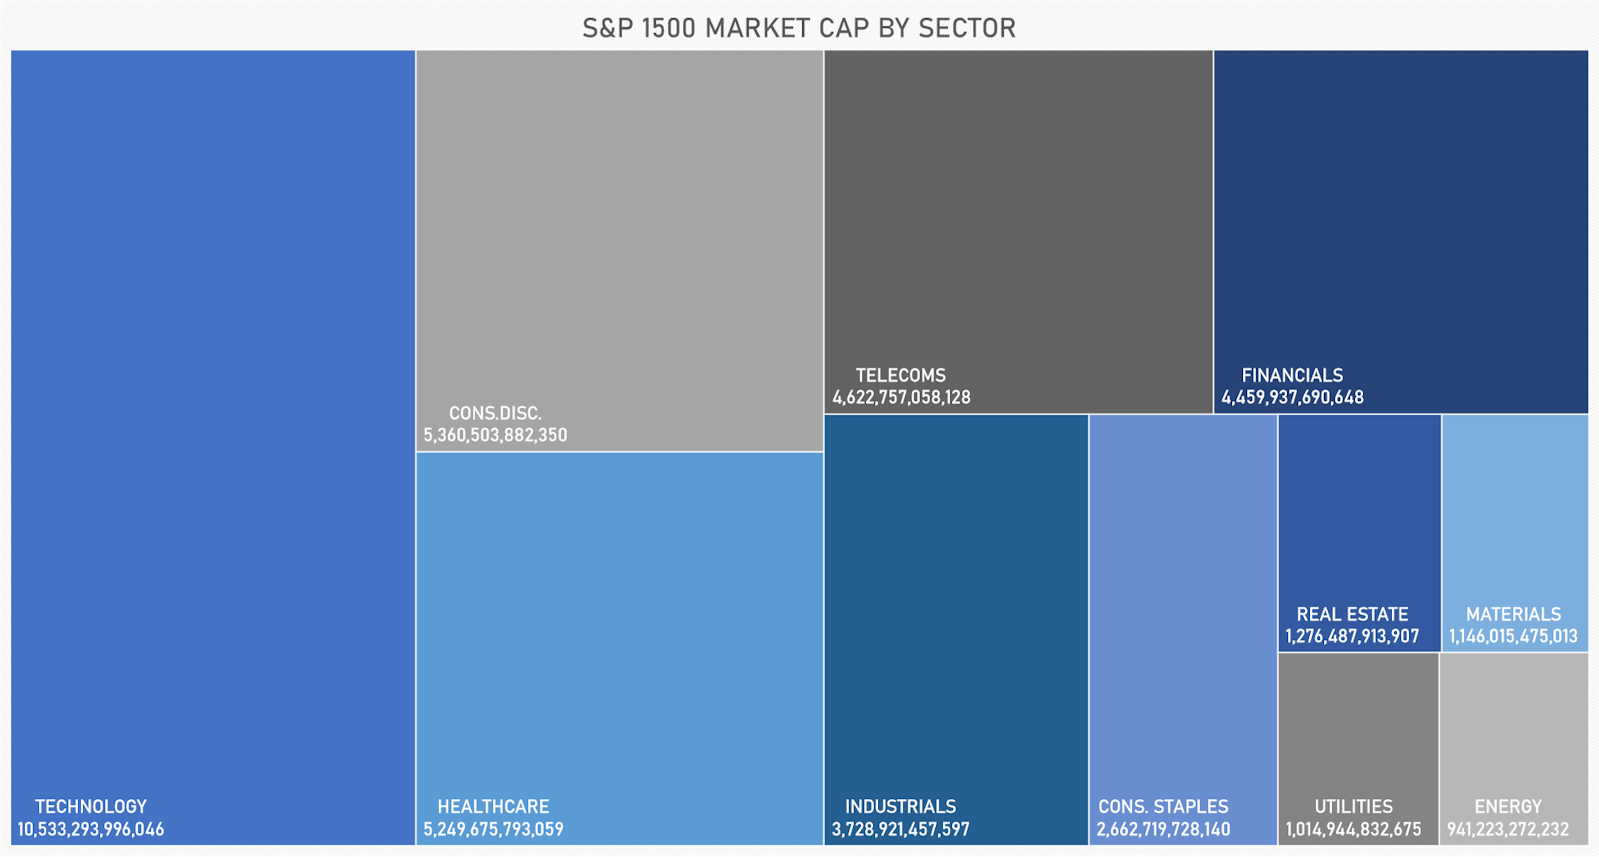 S&P 1500 Market Caps By Sector | Sources: ϕpost, FactSet data